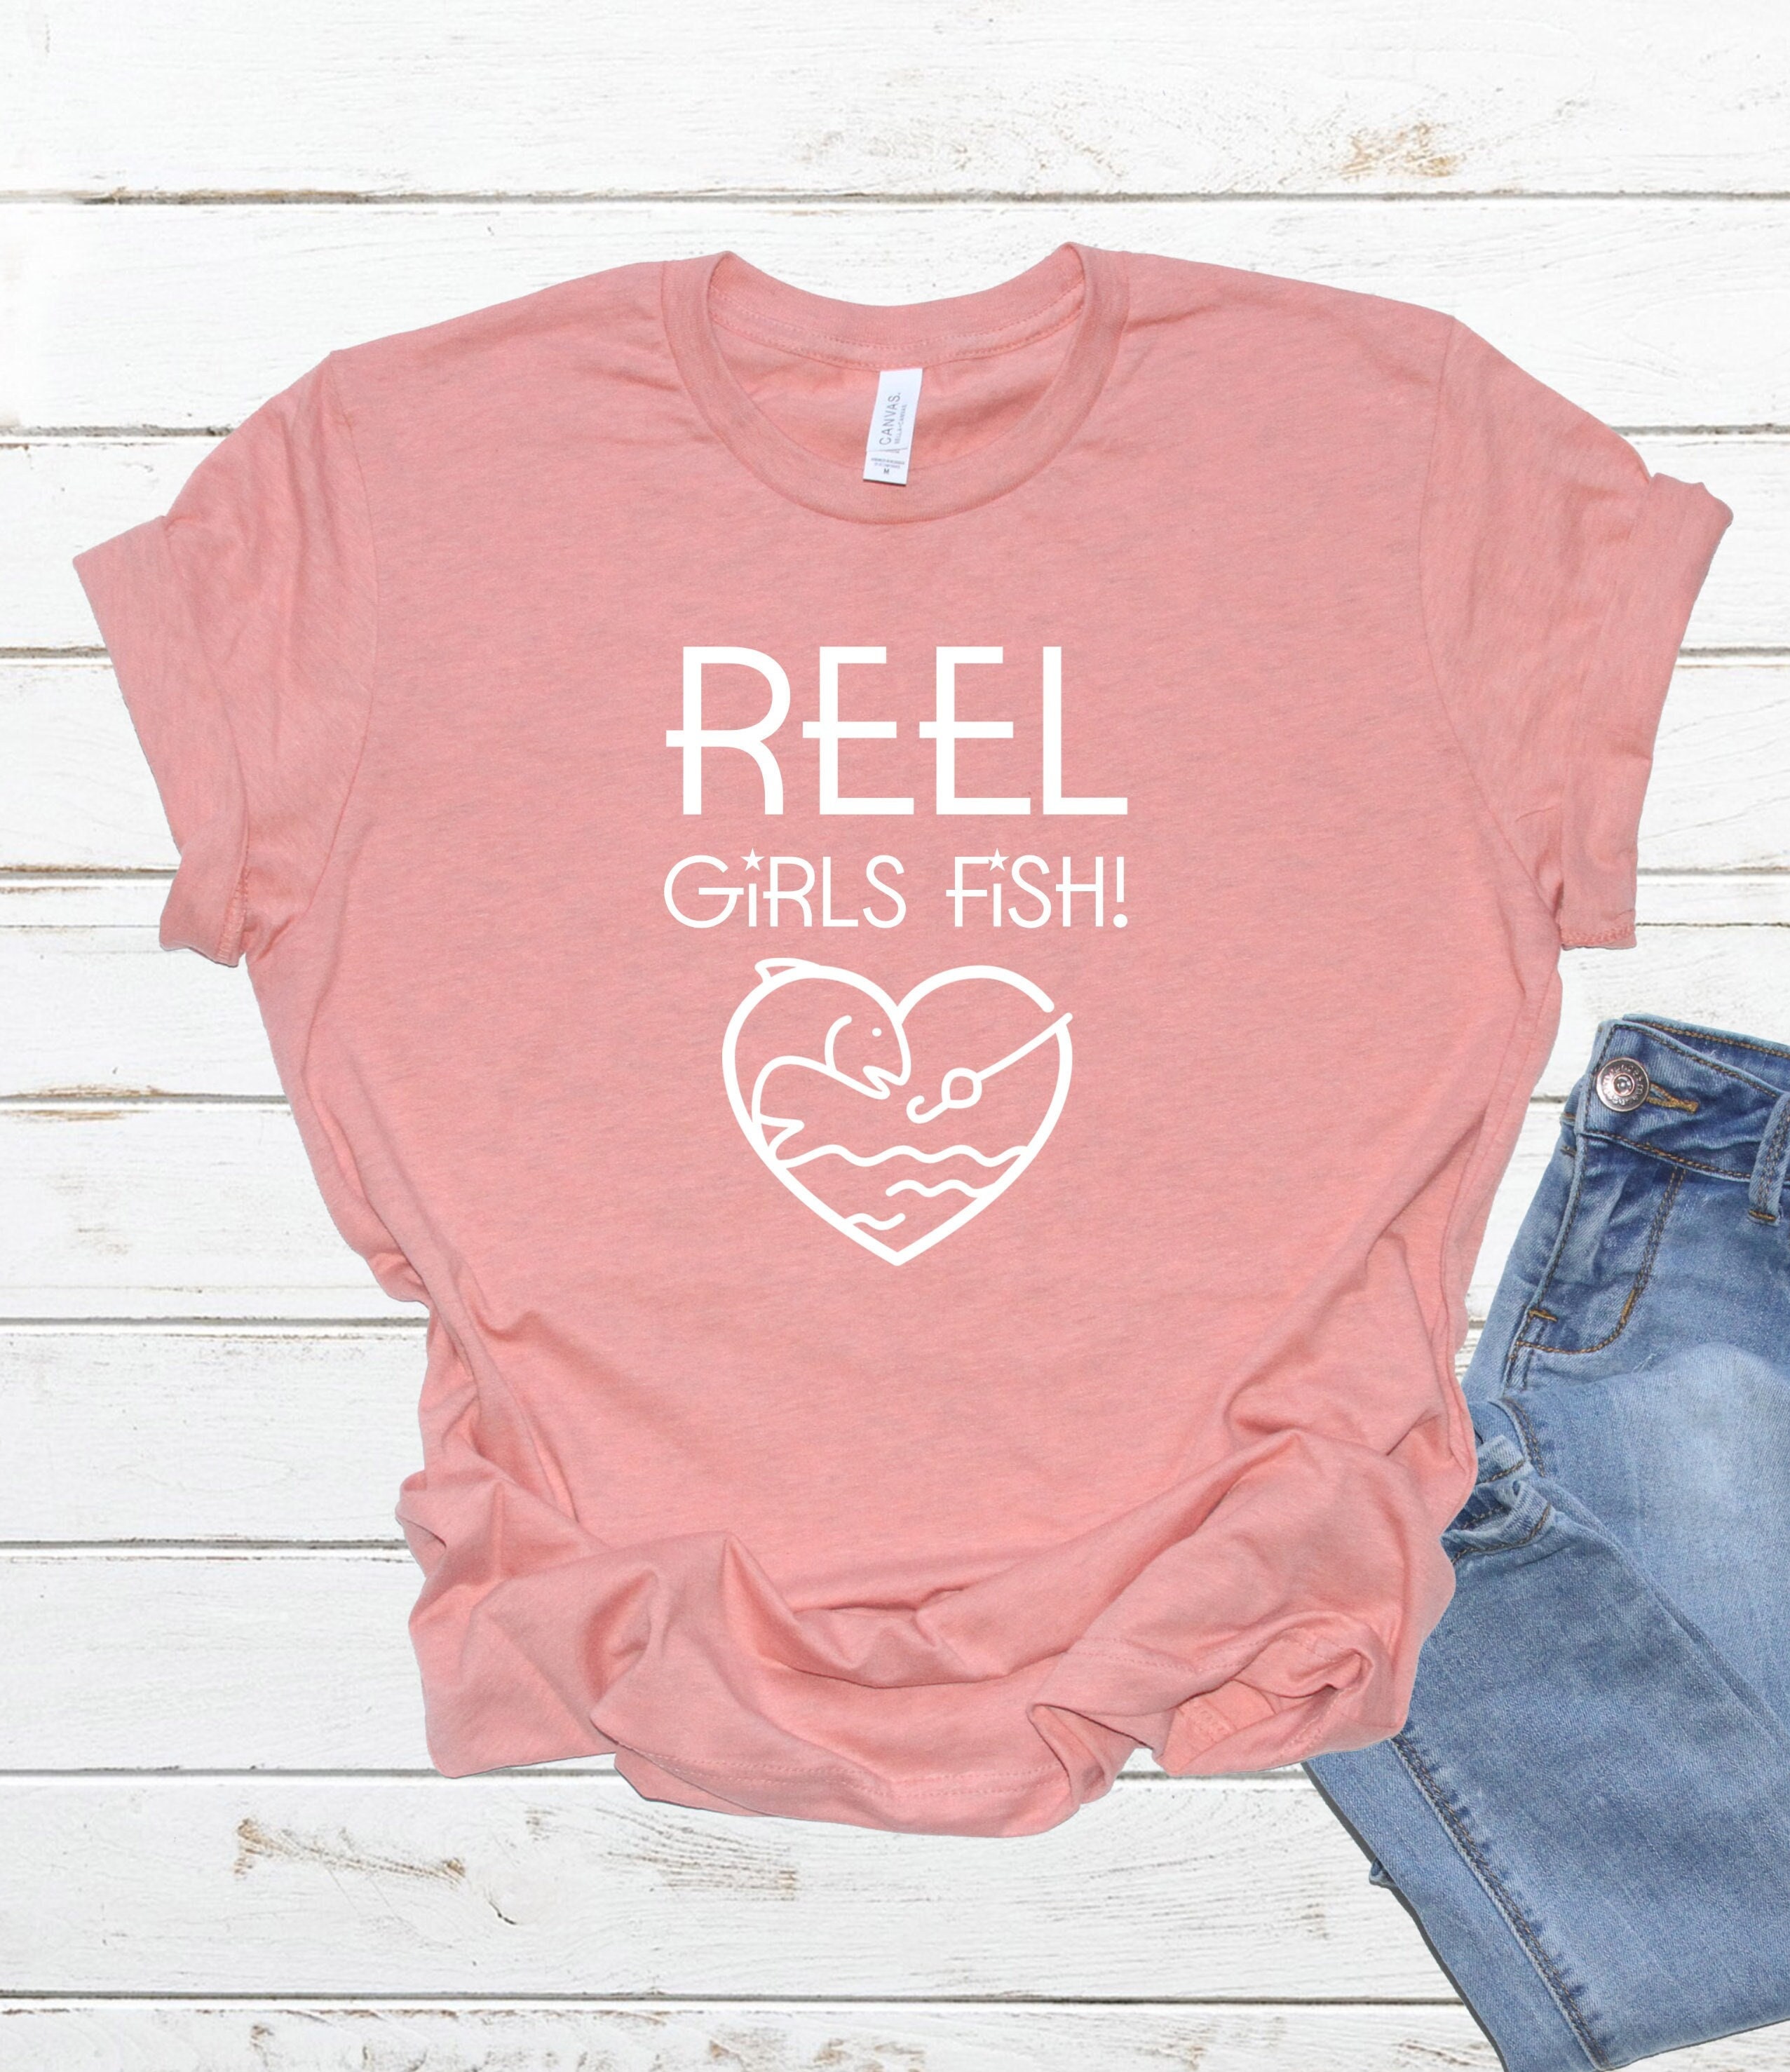 Reel Girls Fish the Ultimate Shirt for Female Anglers 